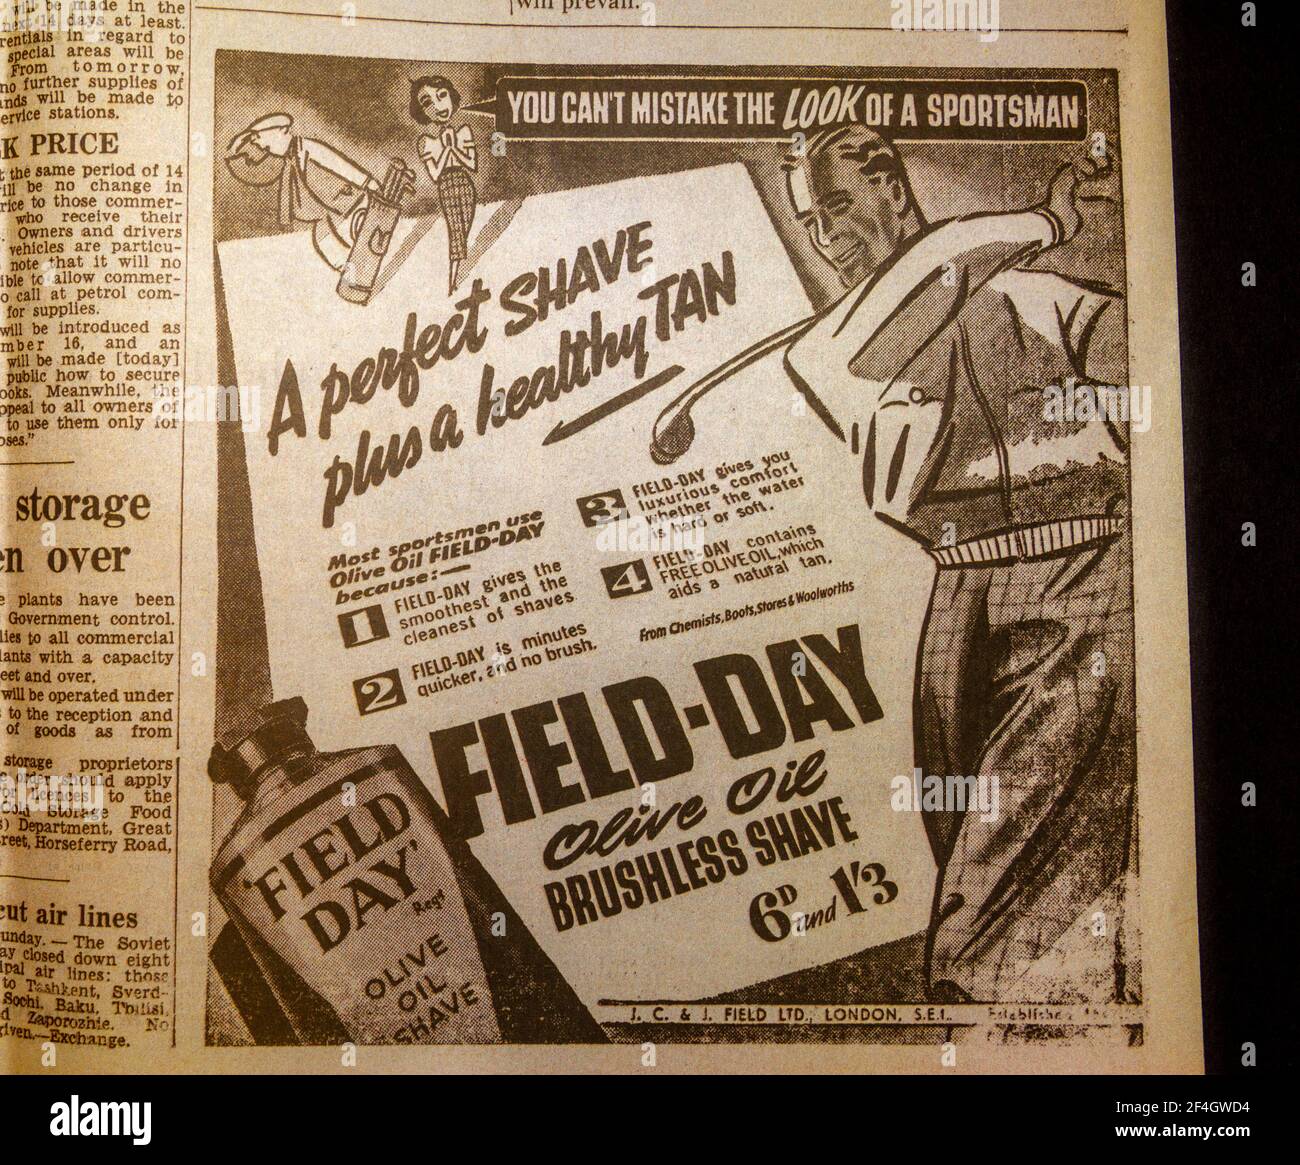 Advert for Field-Day olive oil brushless shave in The Daily Express (replica), 4th September 1939, the day after World War II was declared. Stock Photo